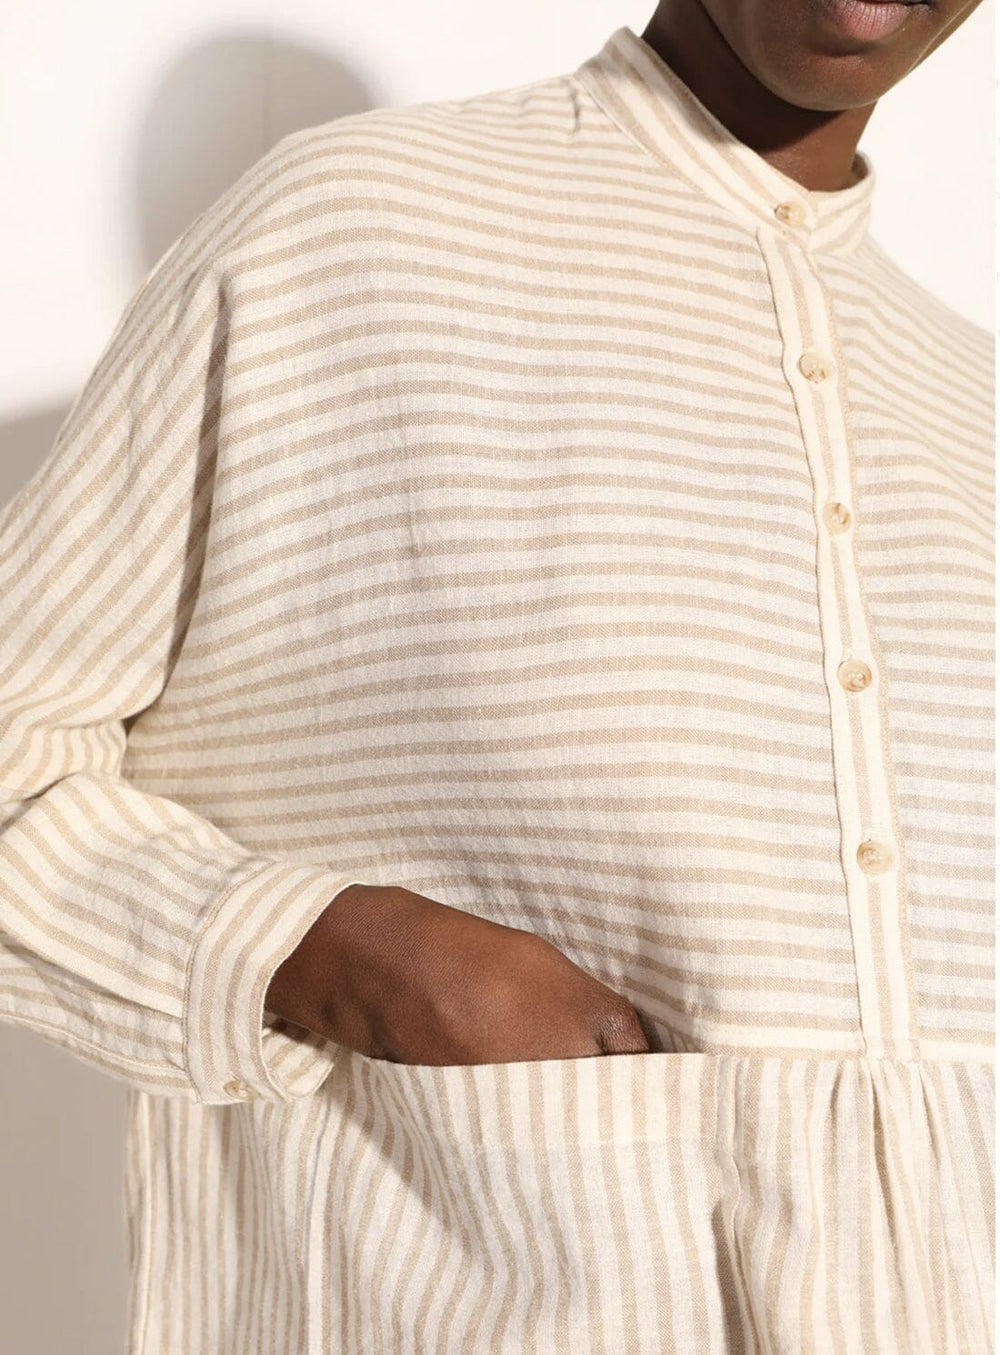 Clay Shirt in Almond Stripe Tops YBDFinds 